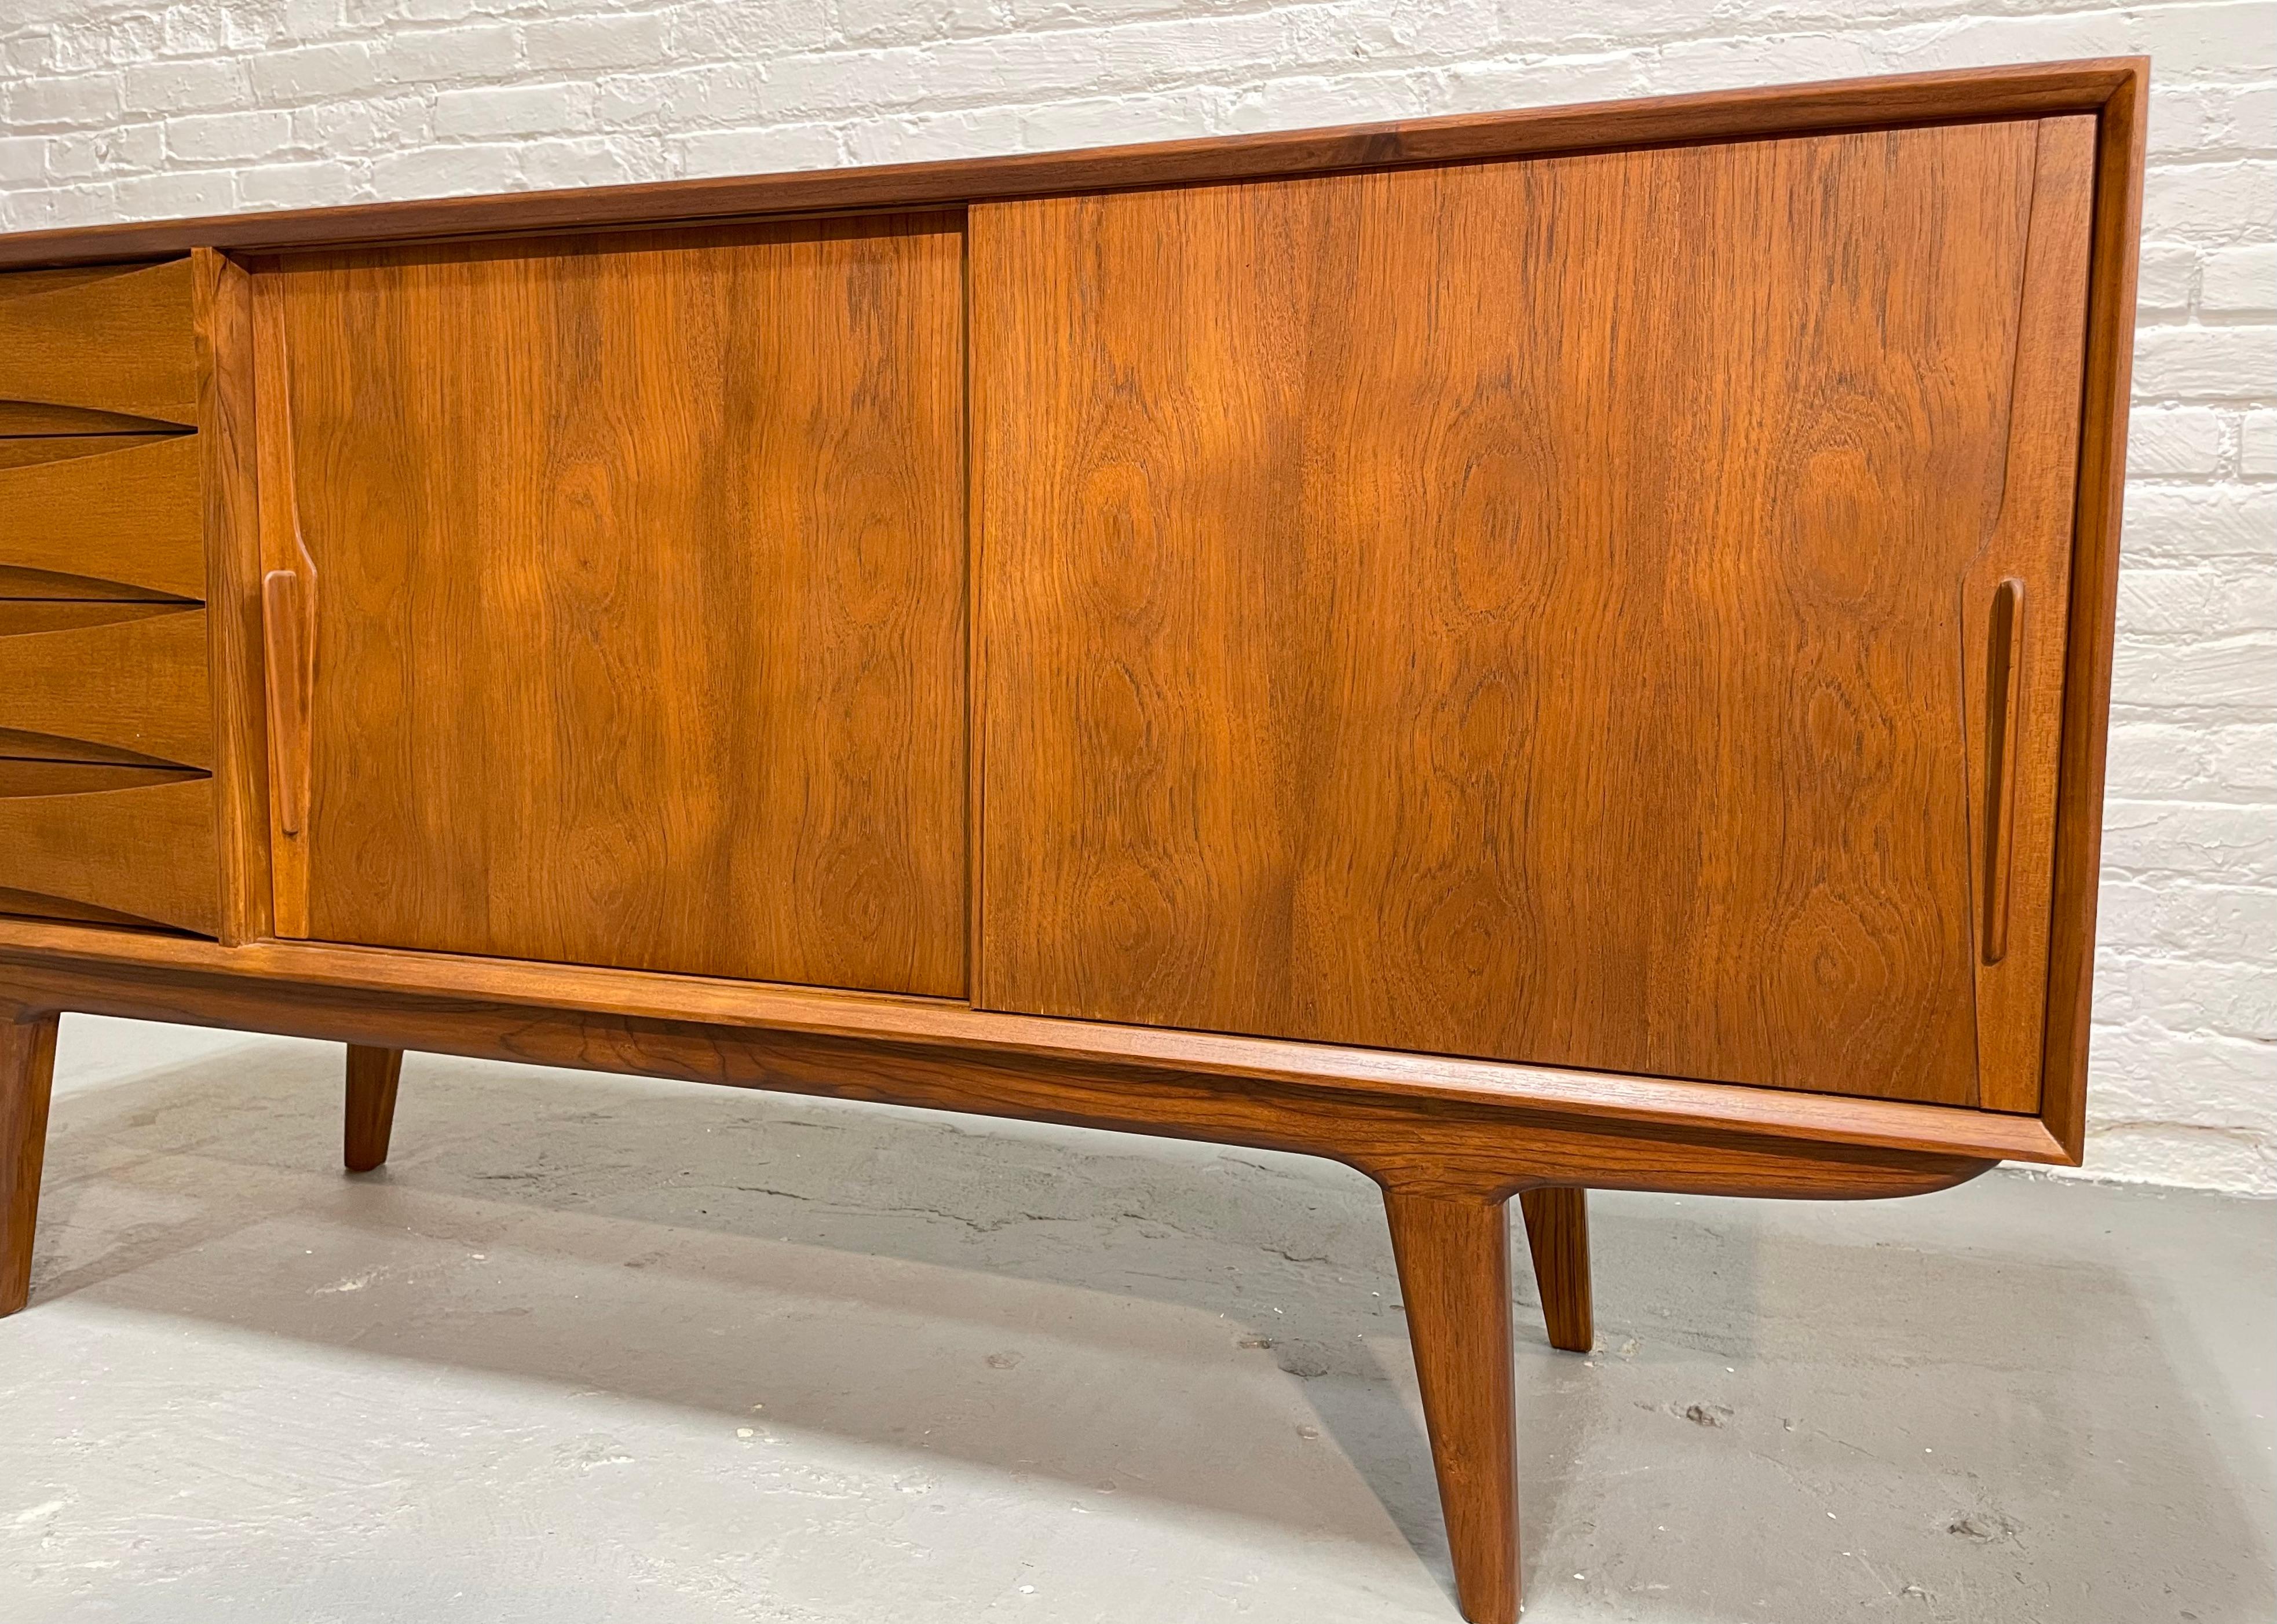 Wood  Handsome Mid Century MODERN styled SIDEBOARD / CREDENZA media stand For Sale